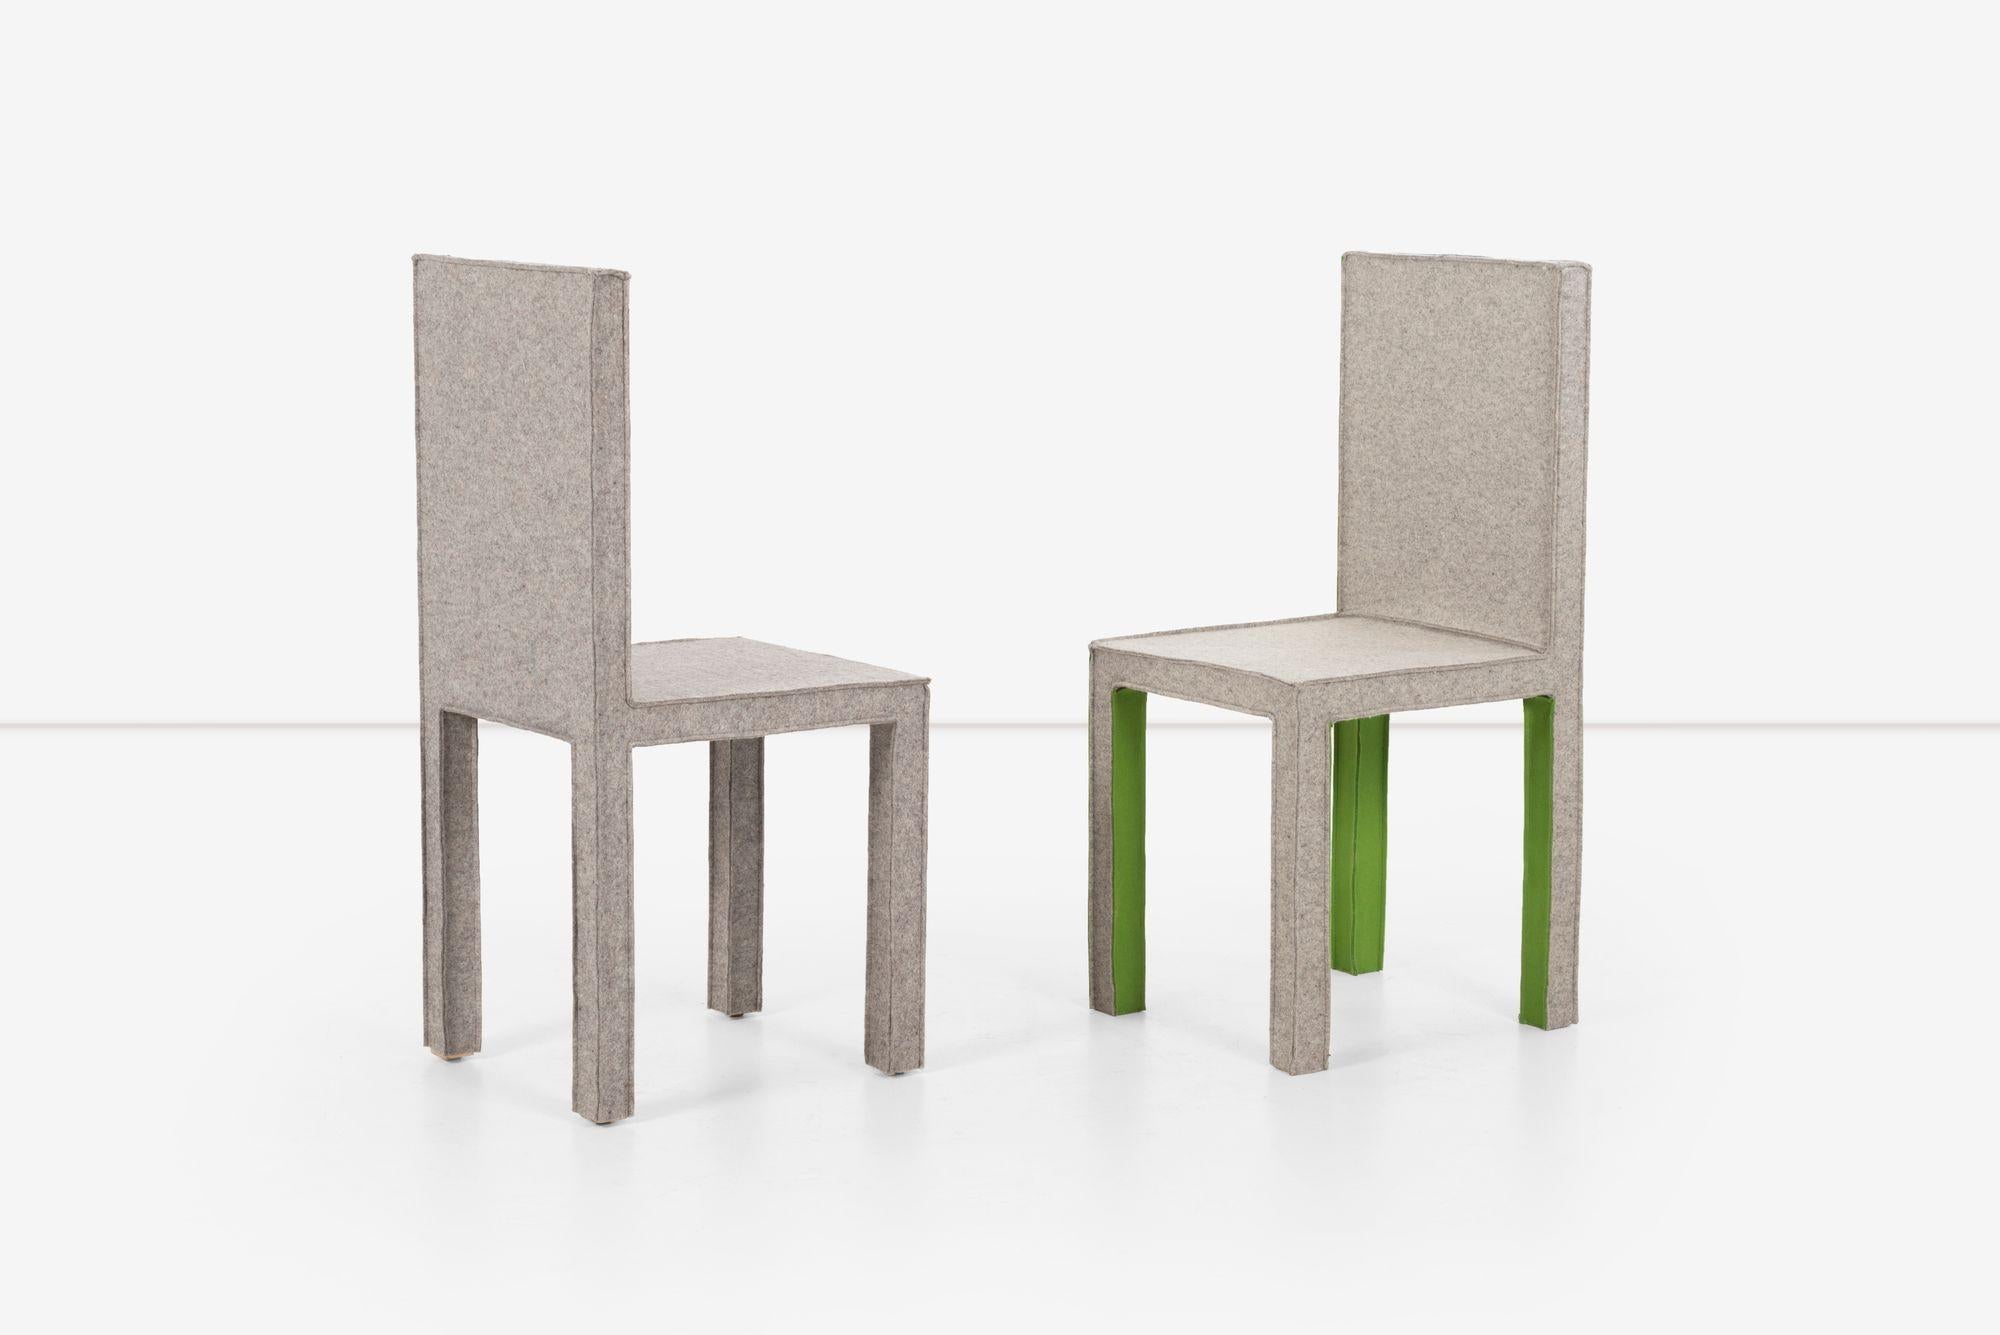 Reed and Delphine Krakoff Rkdk Dining Chairs, Set of Eight For Sale 4